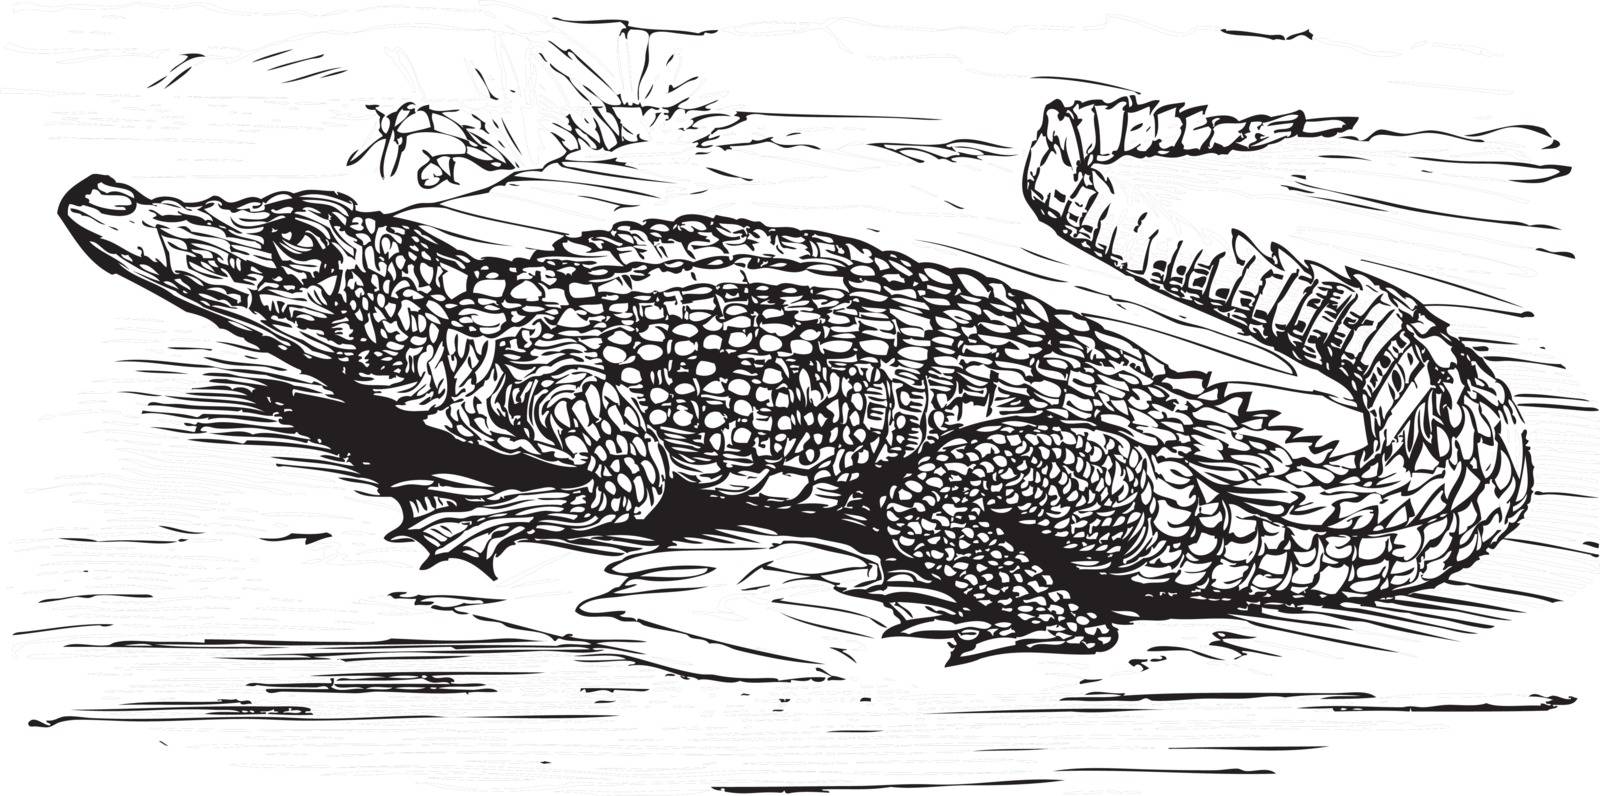 Engraving of a saltwater crocodile, in black lines. Crocodilus biporcatus, from Trousset encyclopedia 1886 - 1891